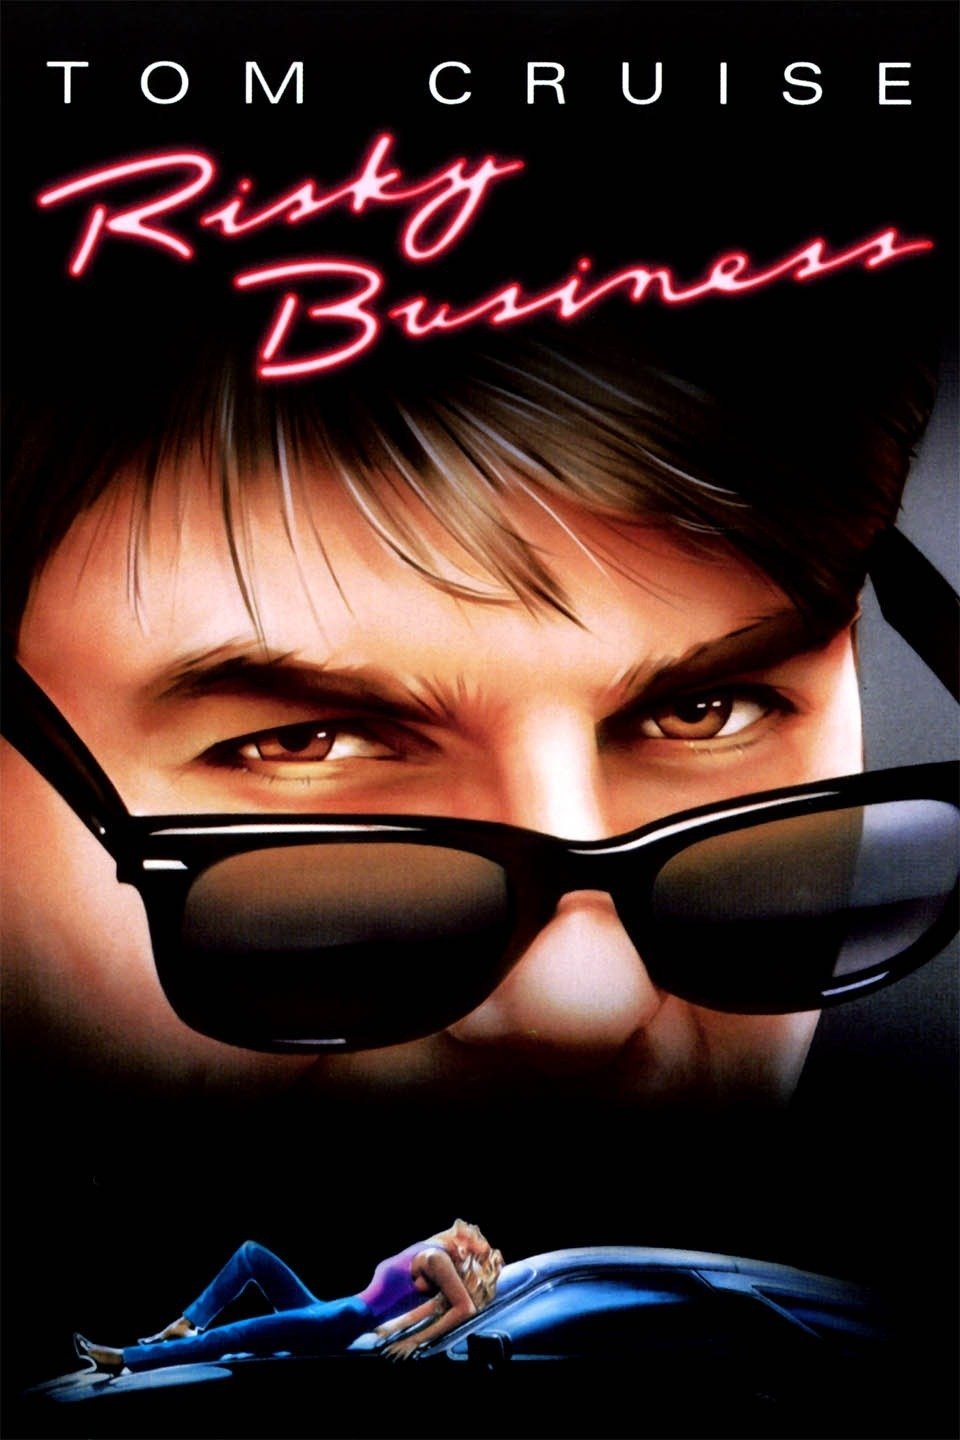 Tom Cruise Risky Business Comedy Film Cinema Advert Poster Famous Star Photo